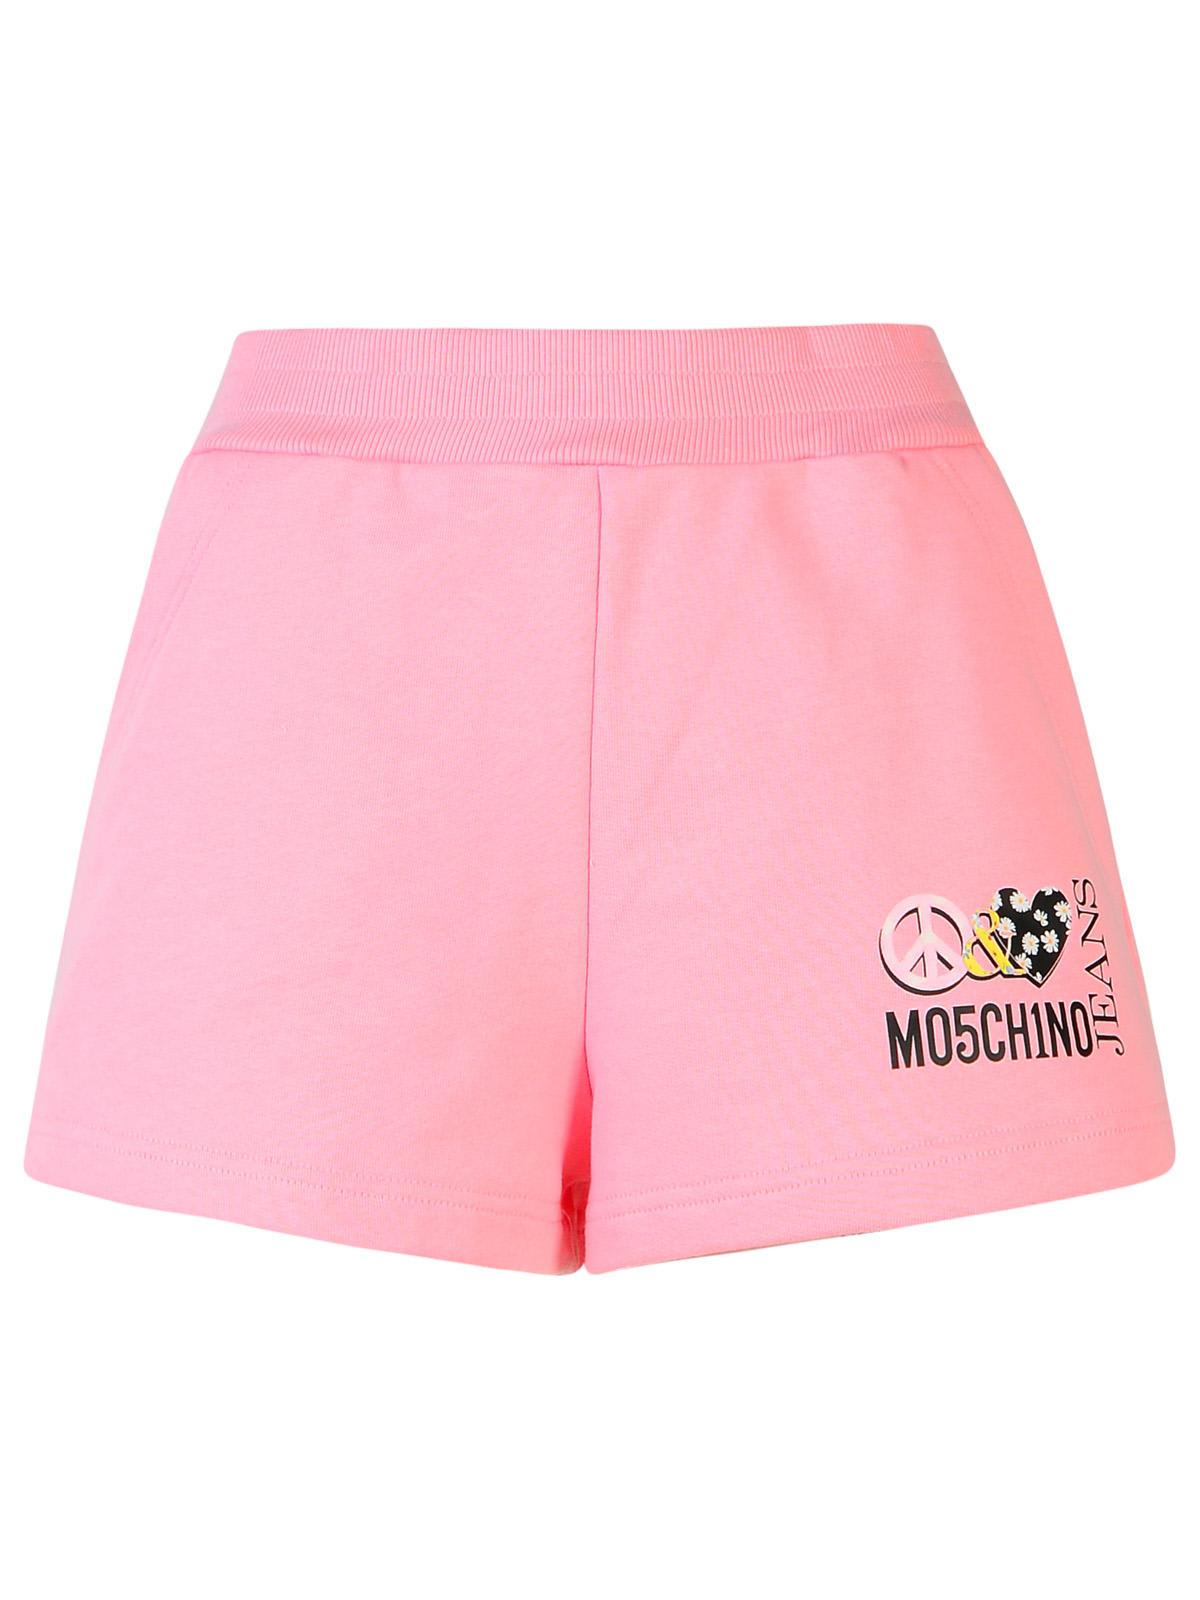 M05ch1n0 Jeans Pink Cotton Shorts